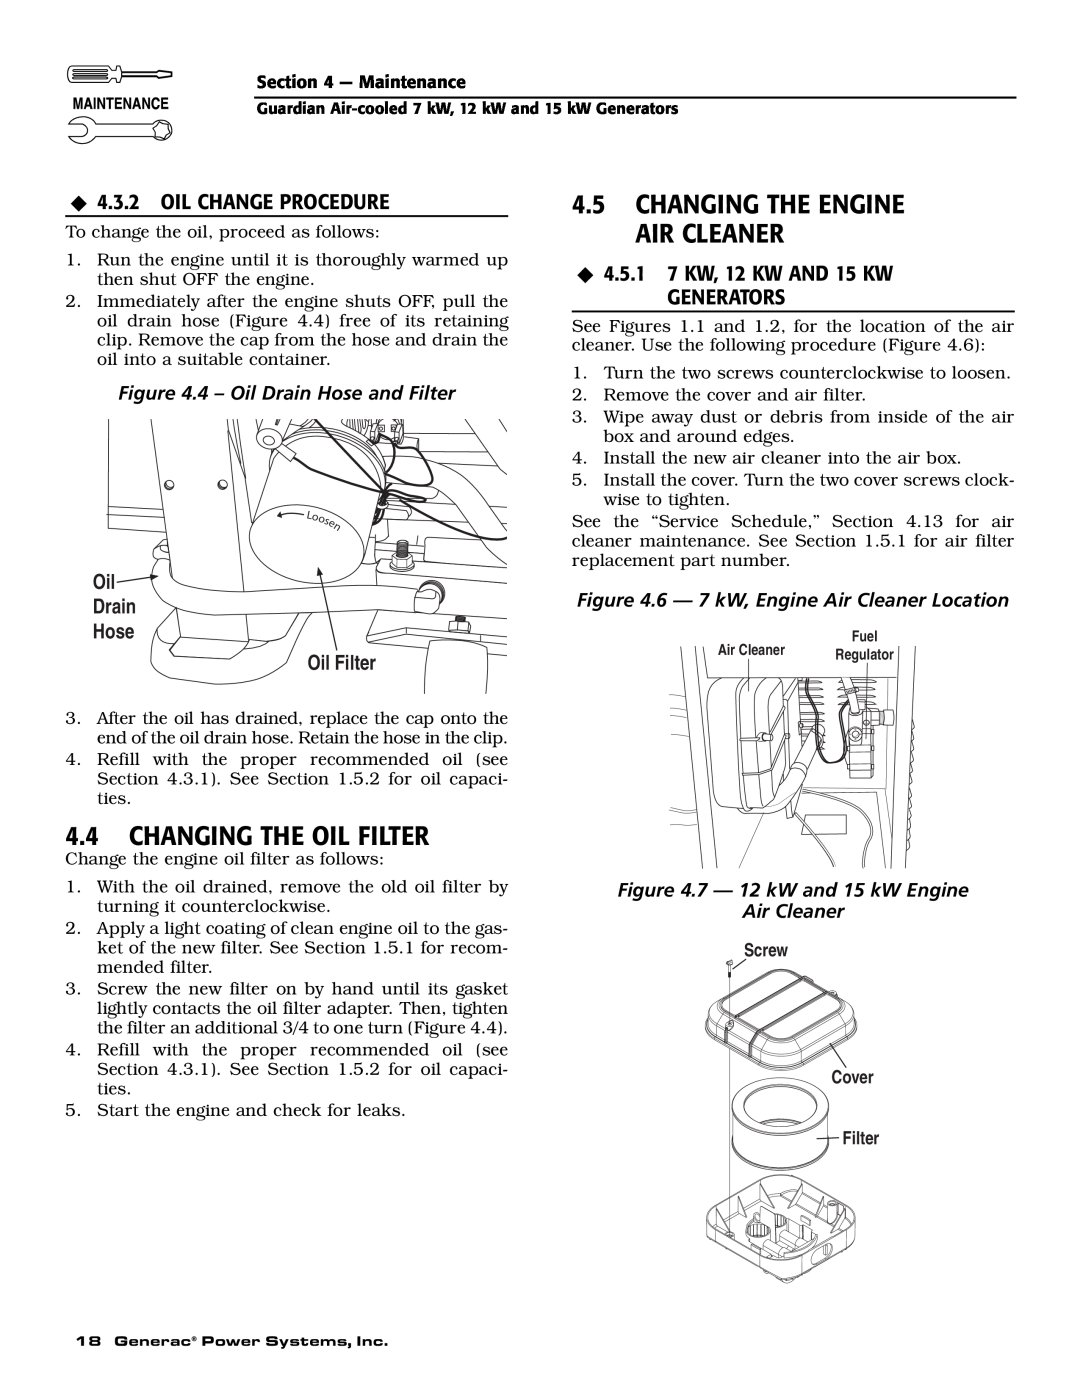 Generac Power Systems 04758-1, 04759-1, 04760-1 owner manual Changing The Oil Filter, Changing The Engine Air Cleaner 